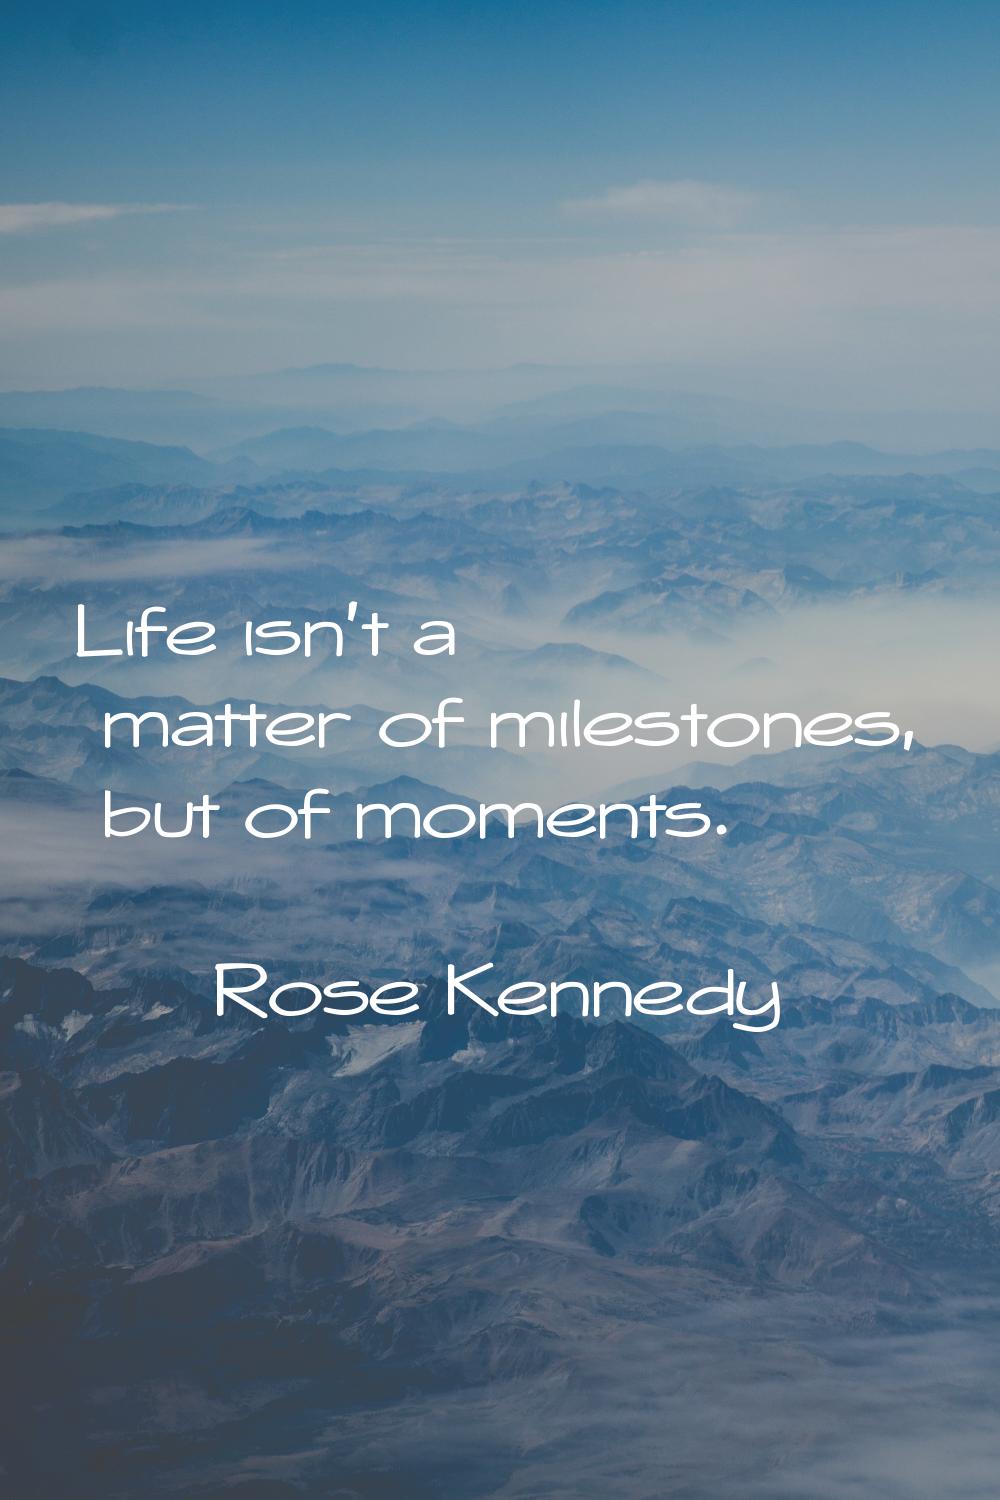 Life isn't a matter of milestones, but of moments.